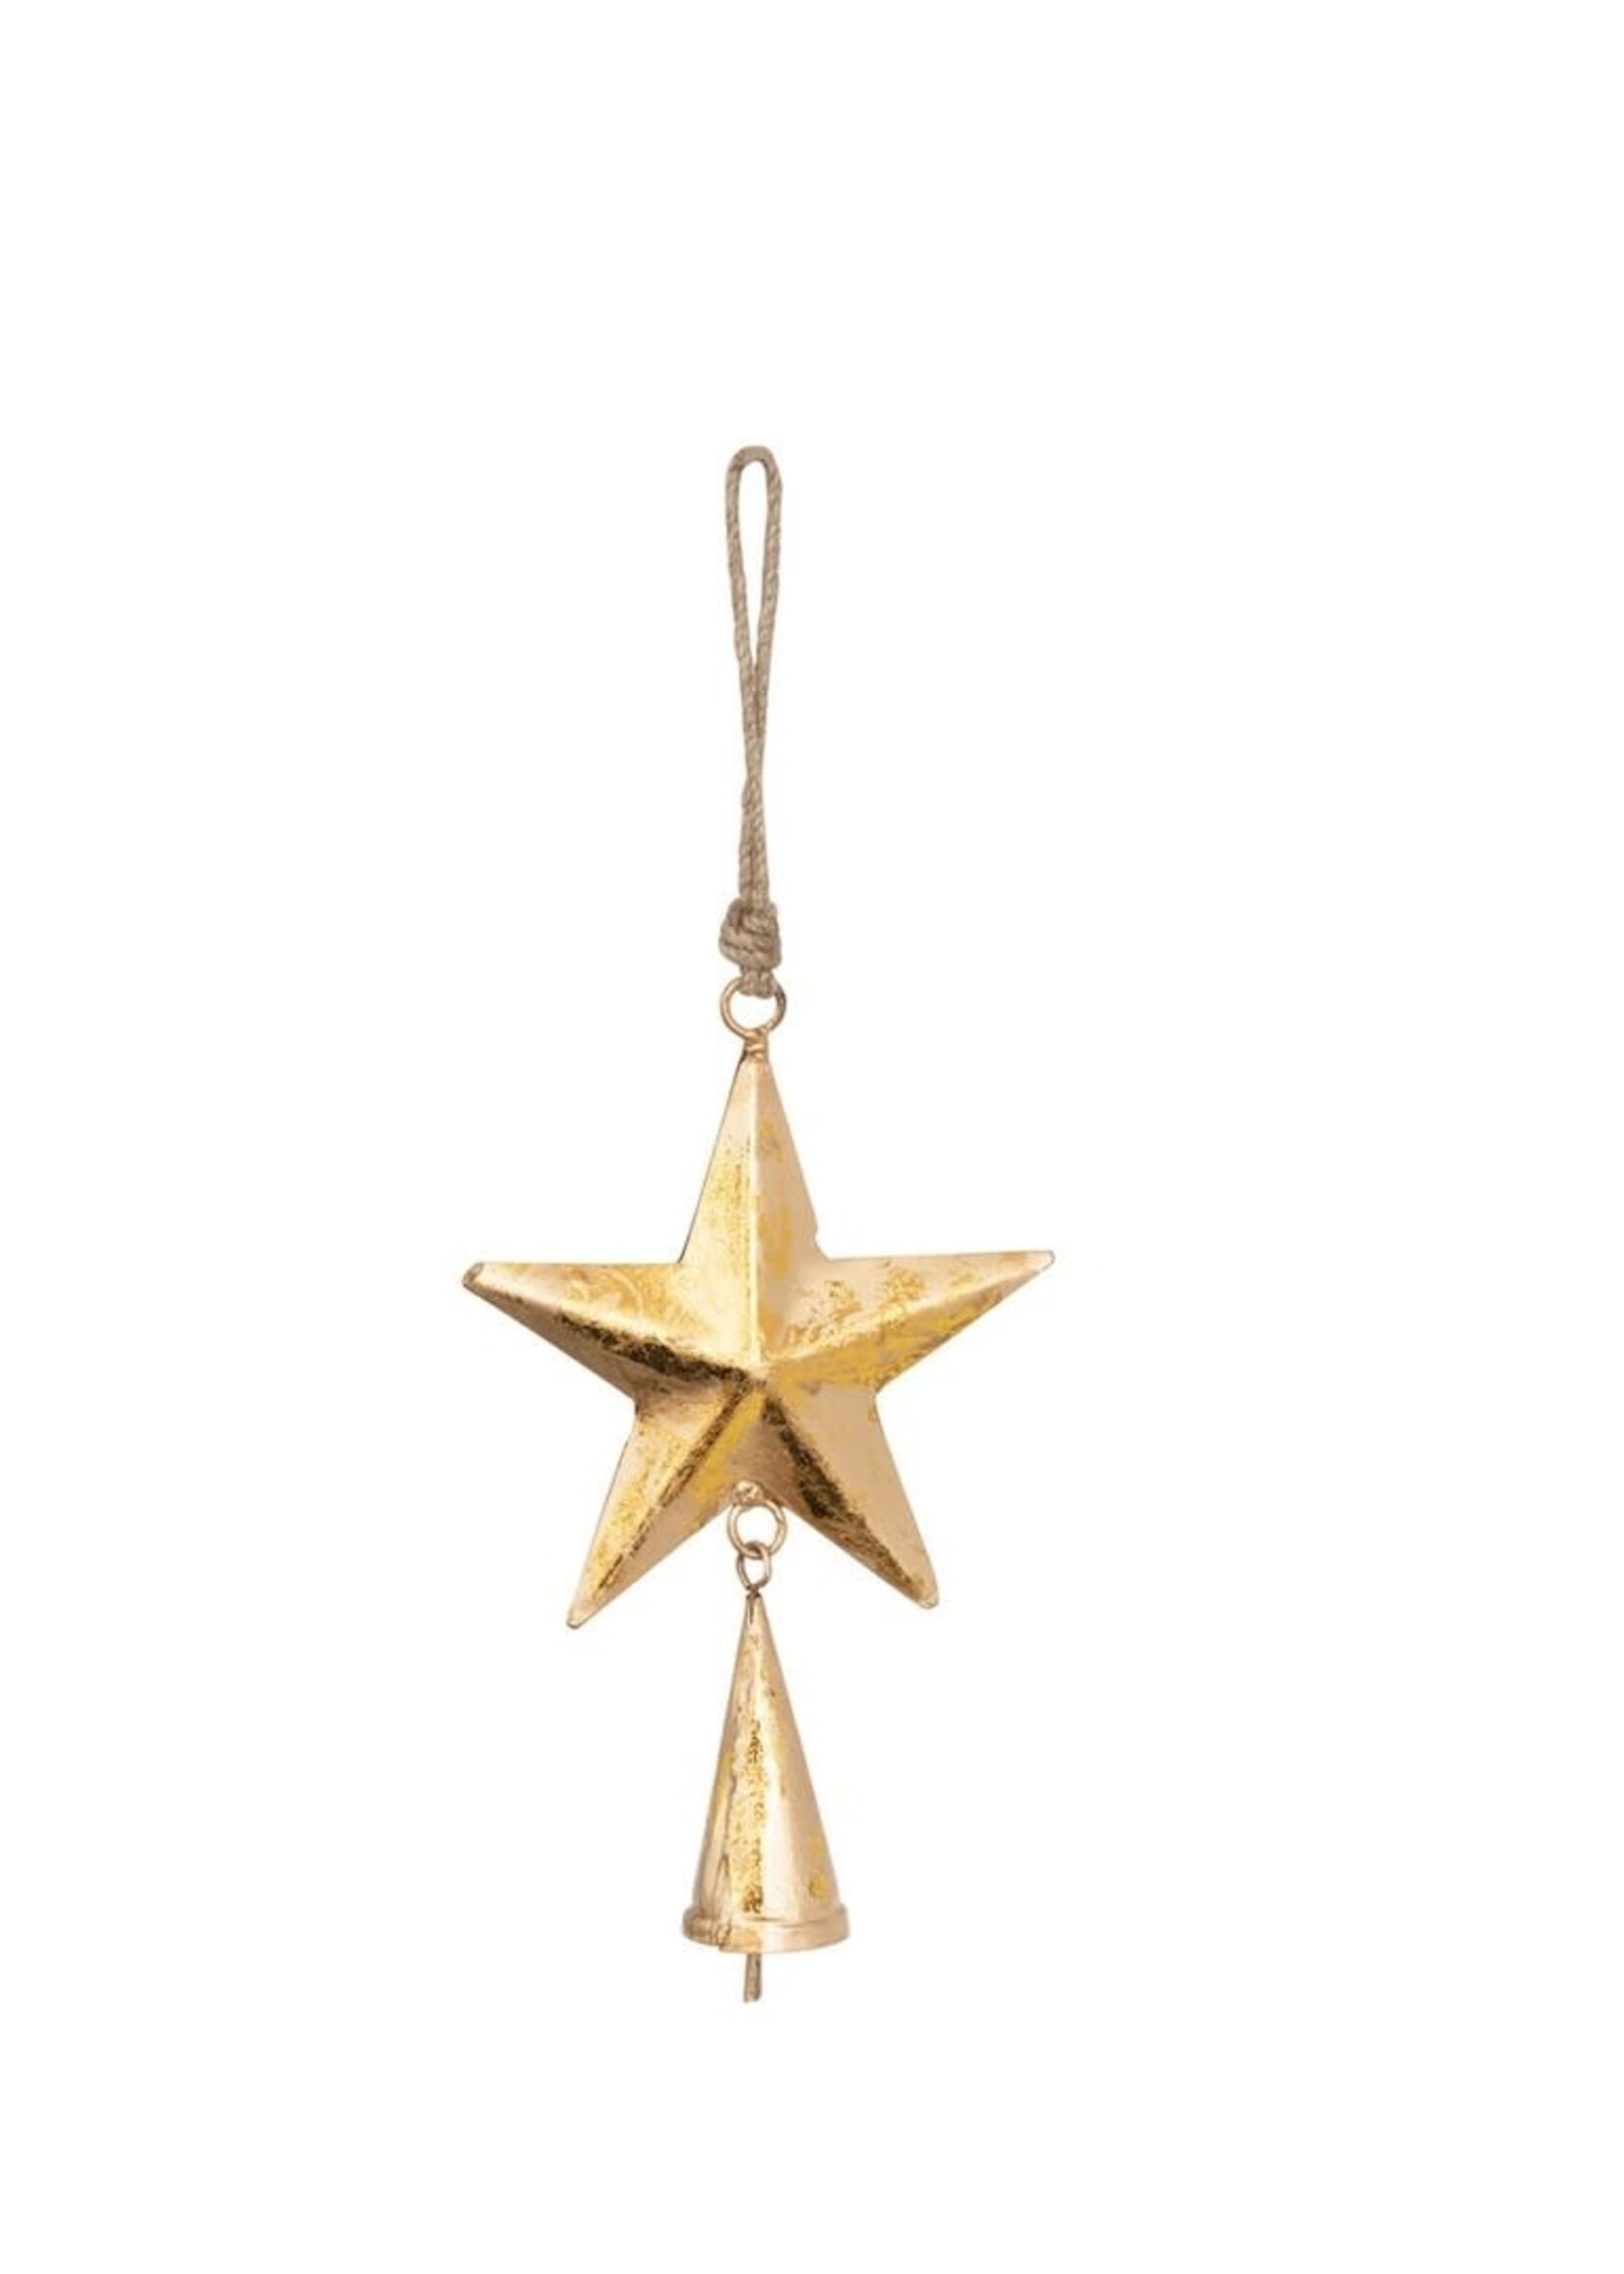 Metal Star Ornament with Bell and Antique Gold Finish